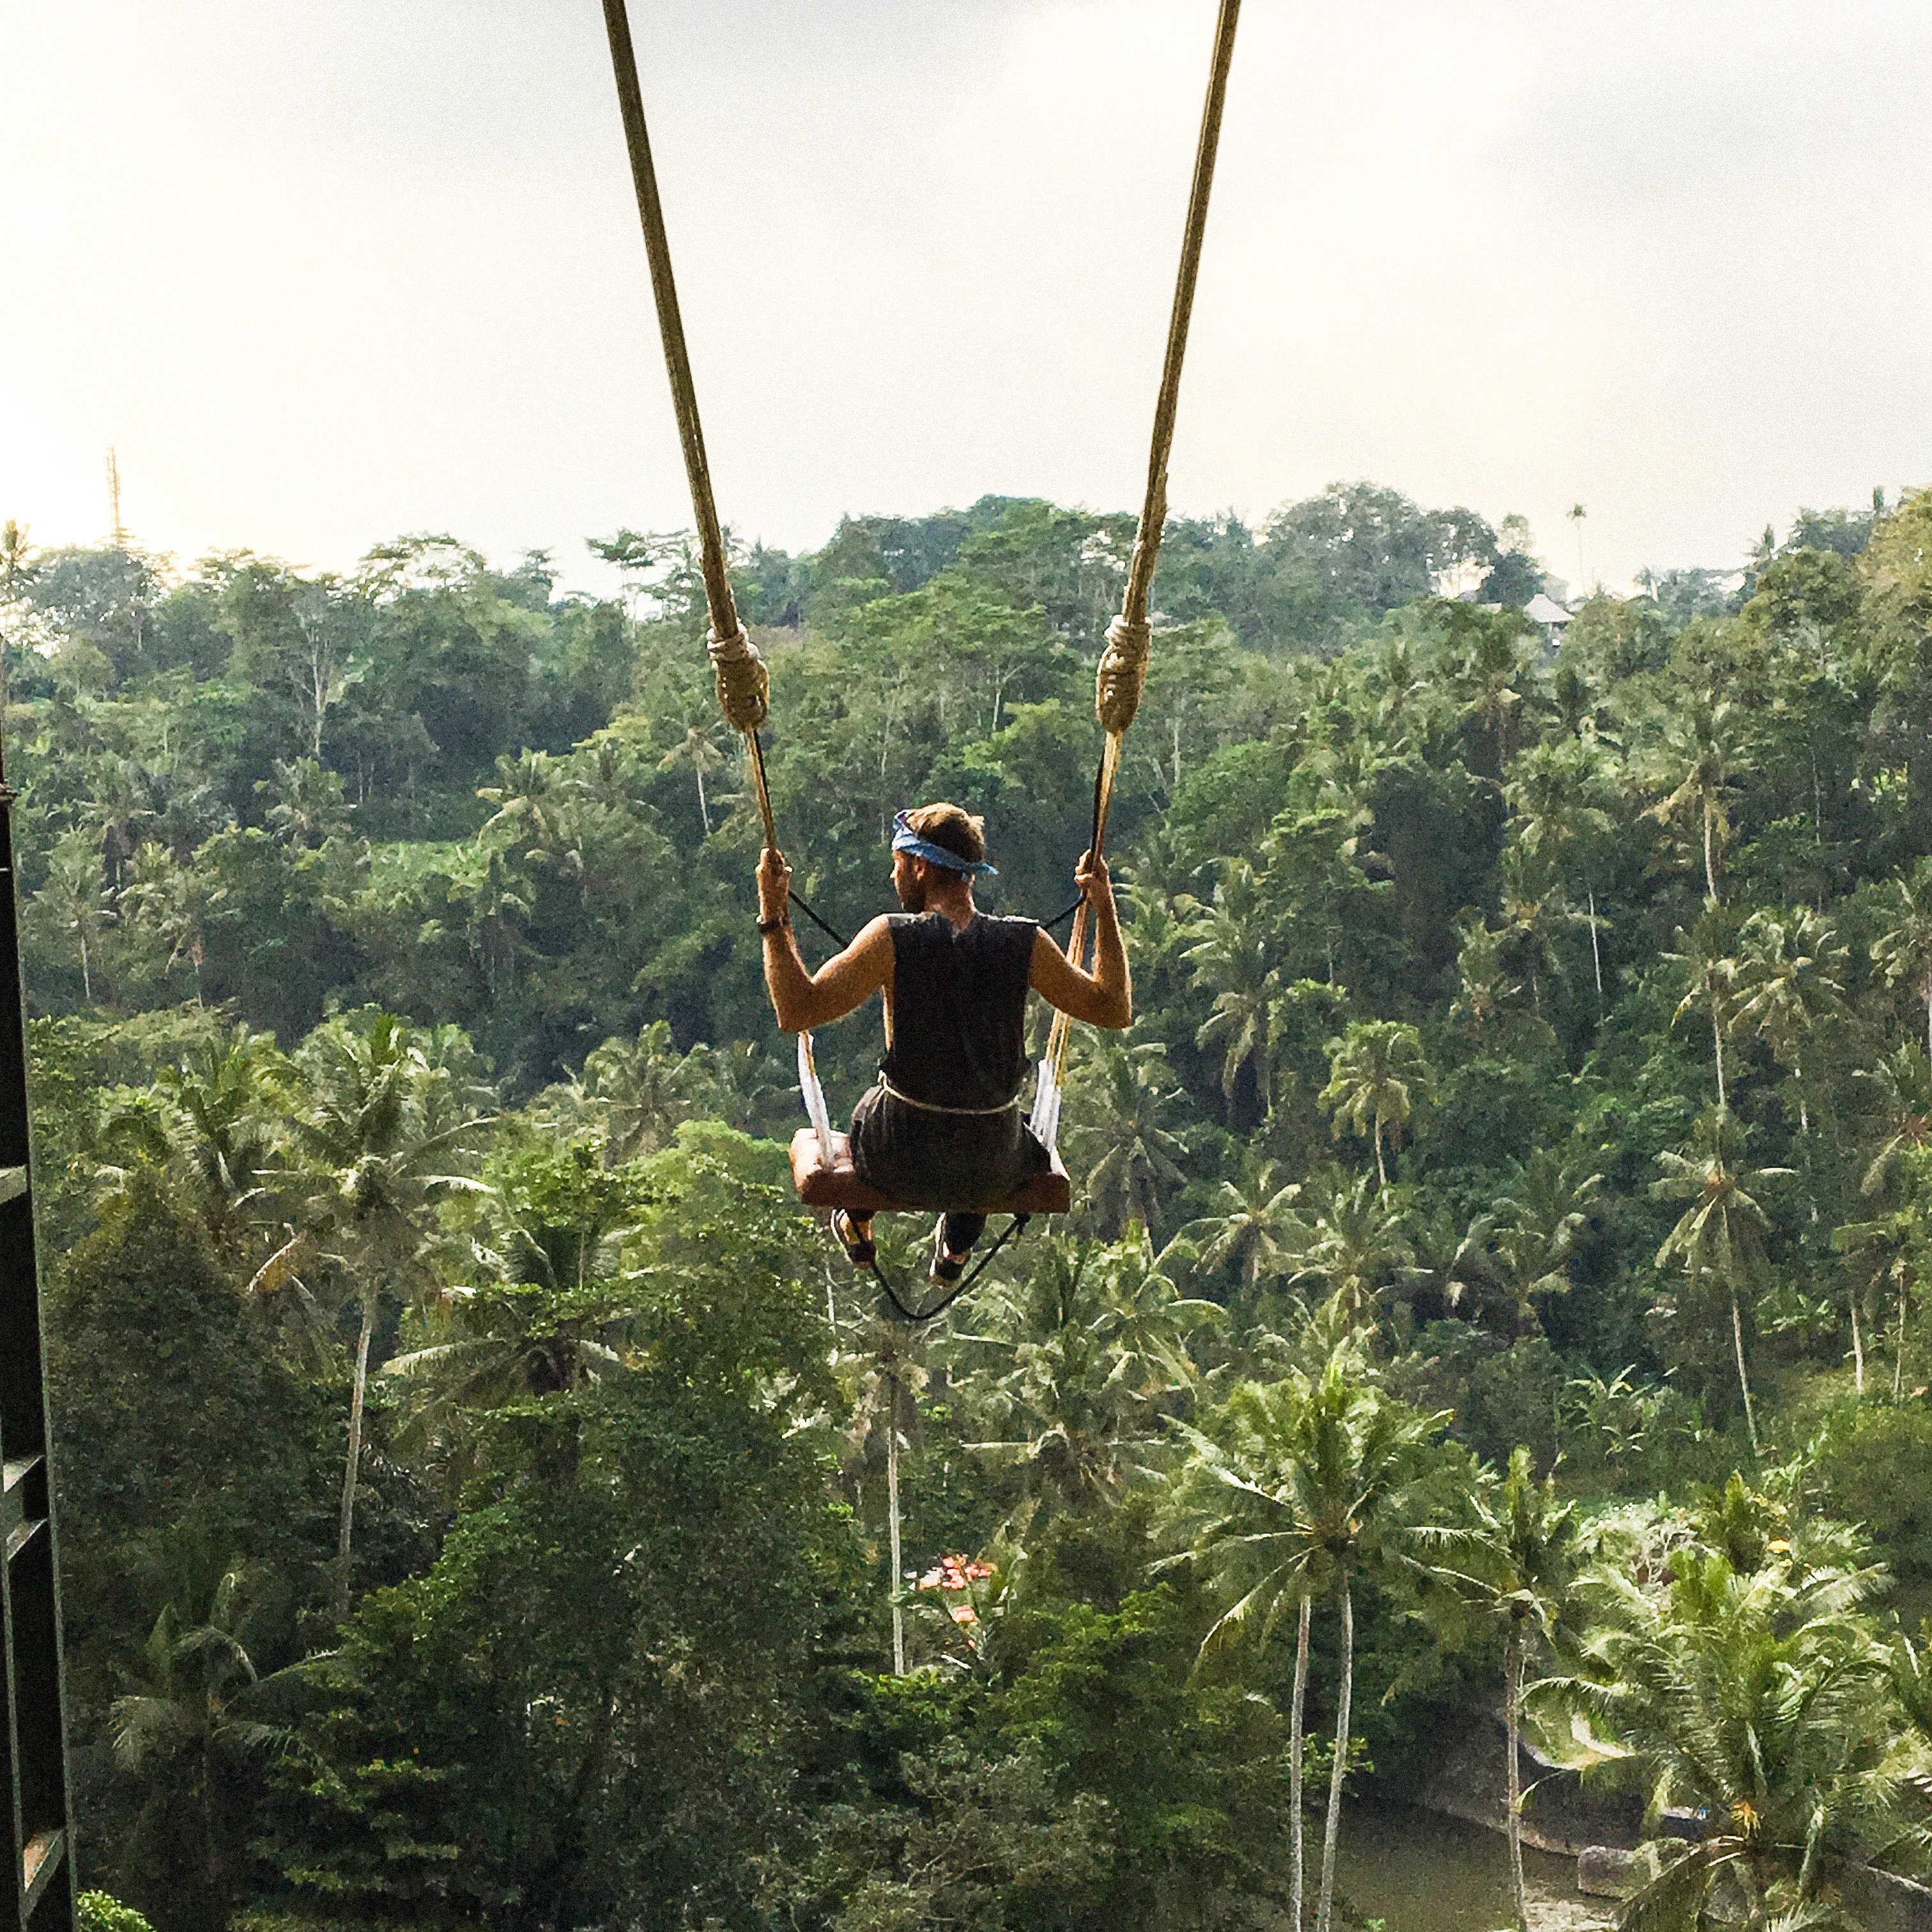 things to do in ubud, best things to do in ubud, top things to do in ubud, things to do in ubud bali, things to do in ubud at night, things to do in ubud blog, free things to do in ubud, things to do in ubud shopping, things to do in ubud tripadvisor, things to do in ubud centre, things to do in bali, what to do in ubud, ubud indonesia, where to go in bali, ubud things to do, get your guide bali, best things to do in bali